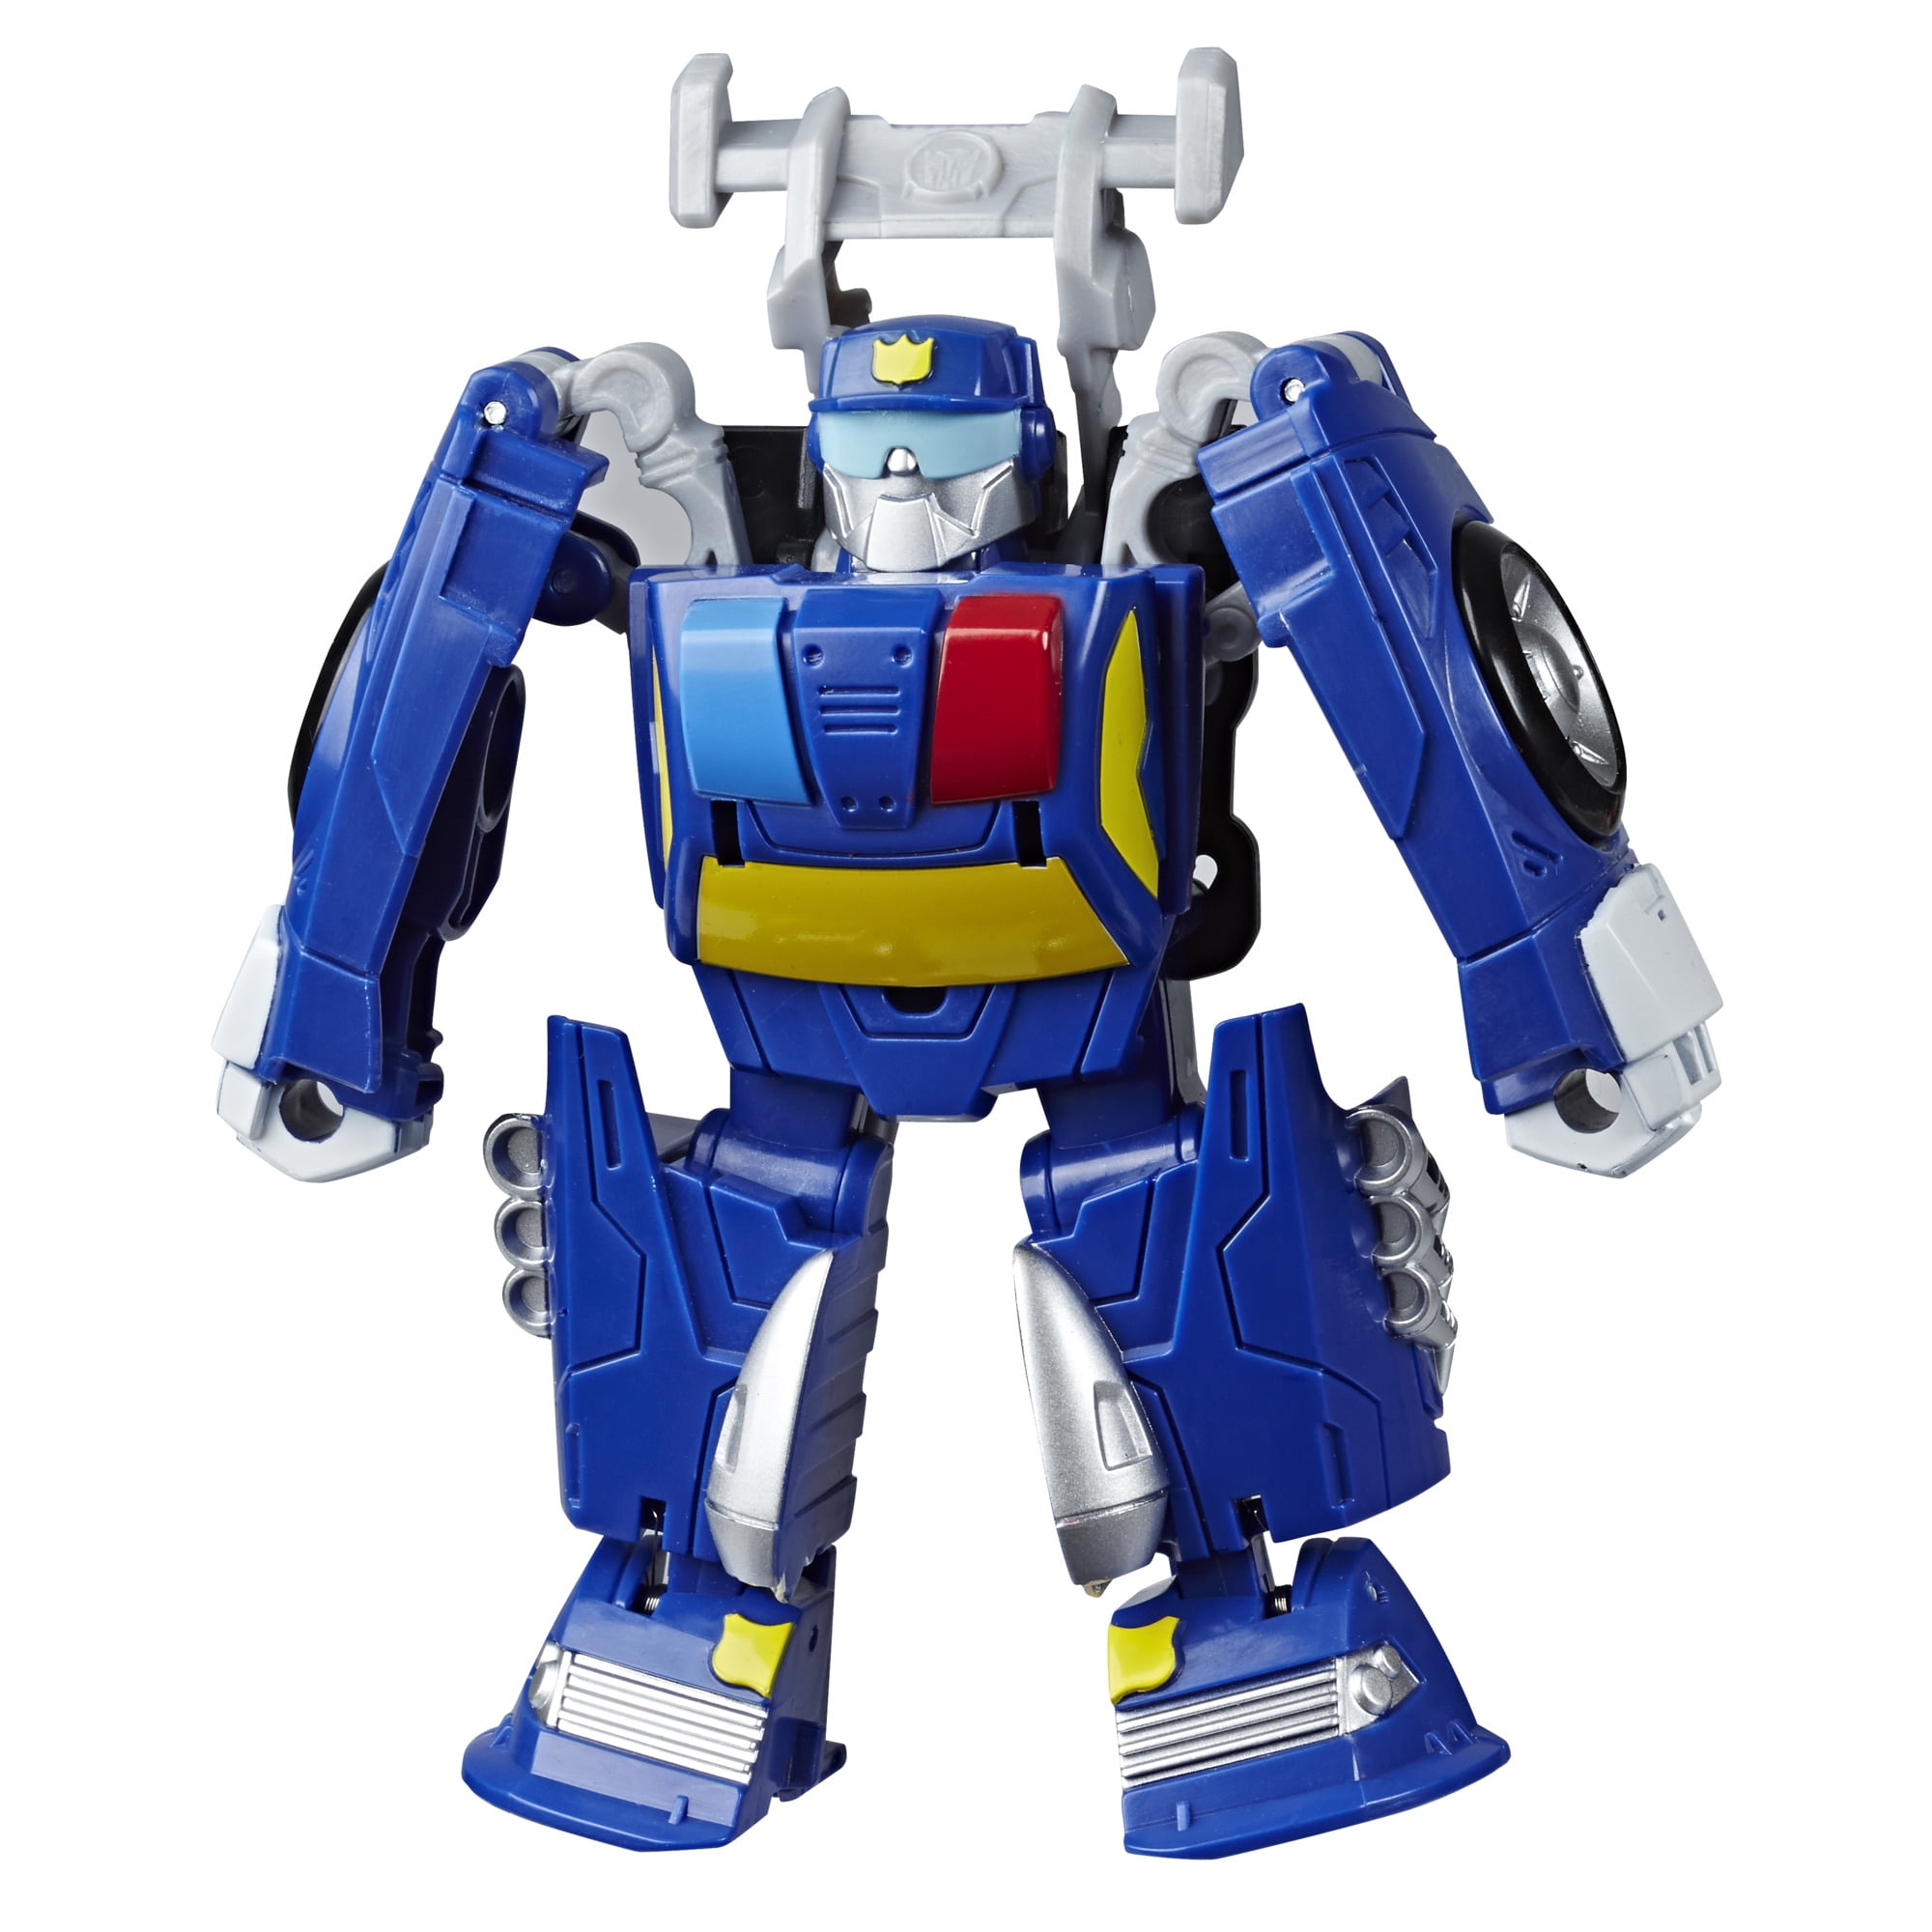 Transformers Playskool Heroes Rescue Bots CHASE THE POLICE Action Figure Spiel 